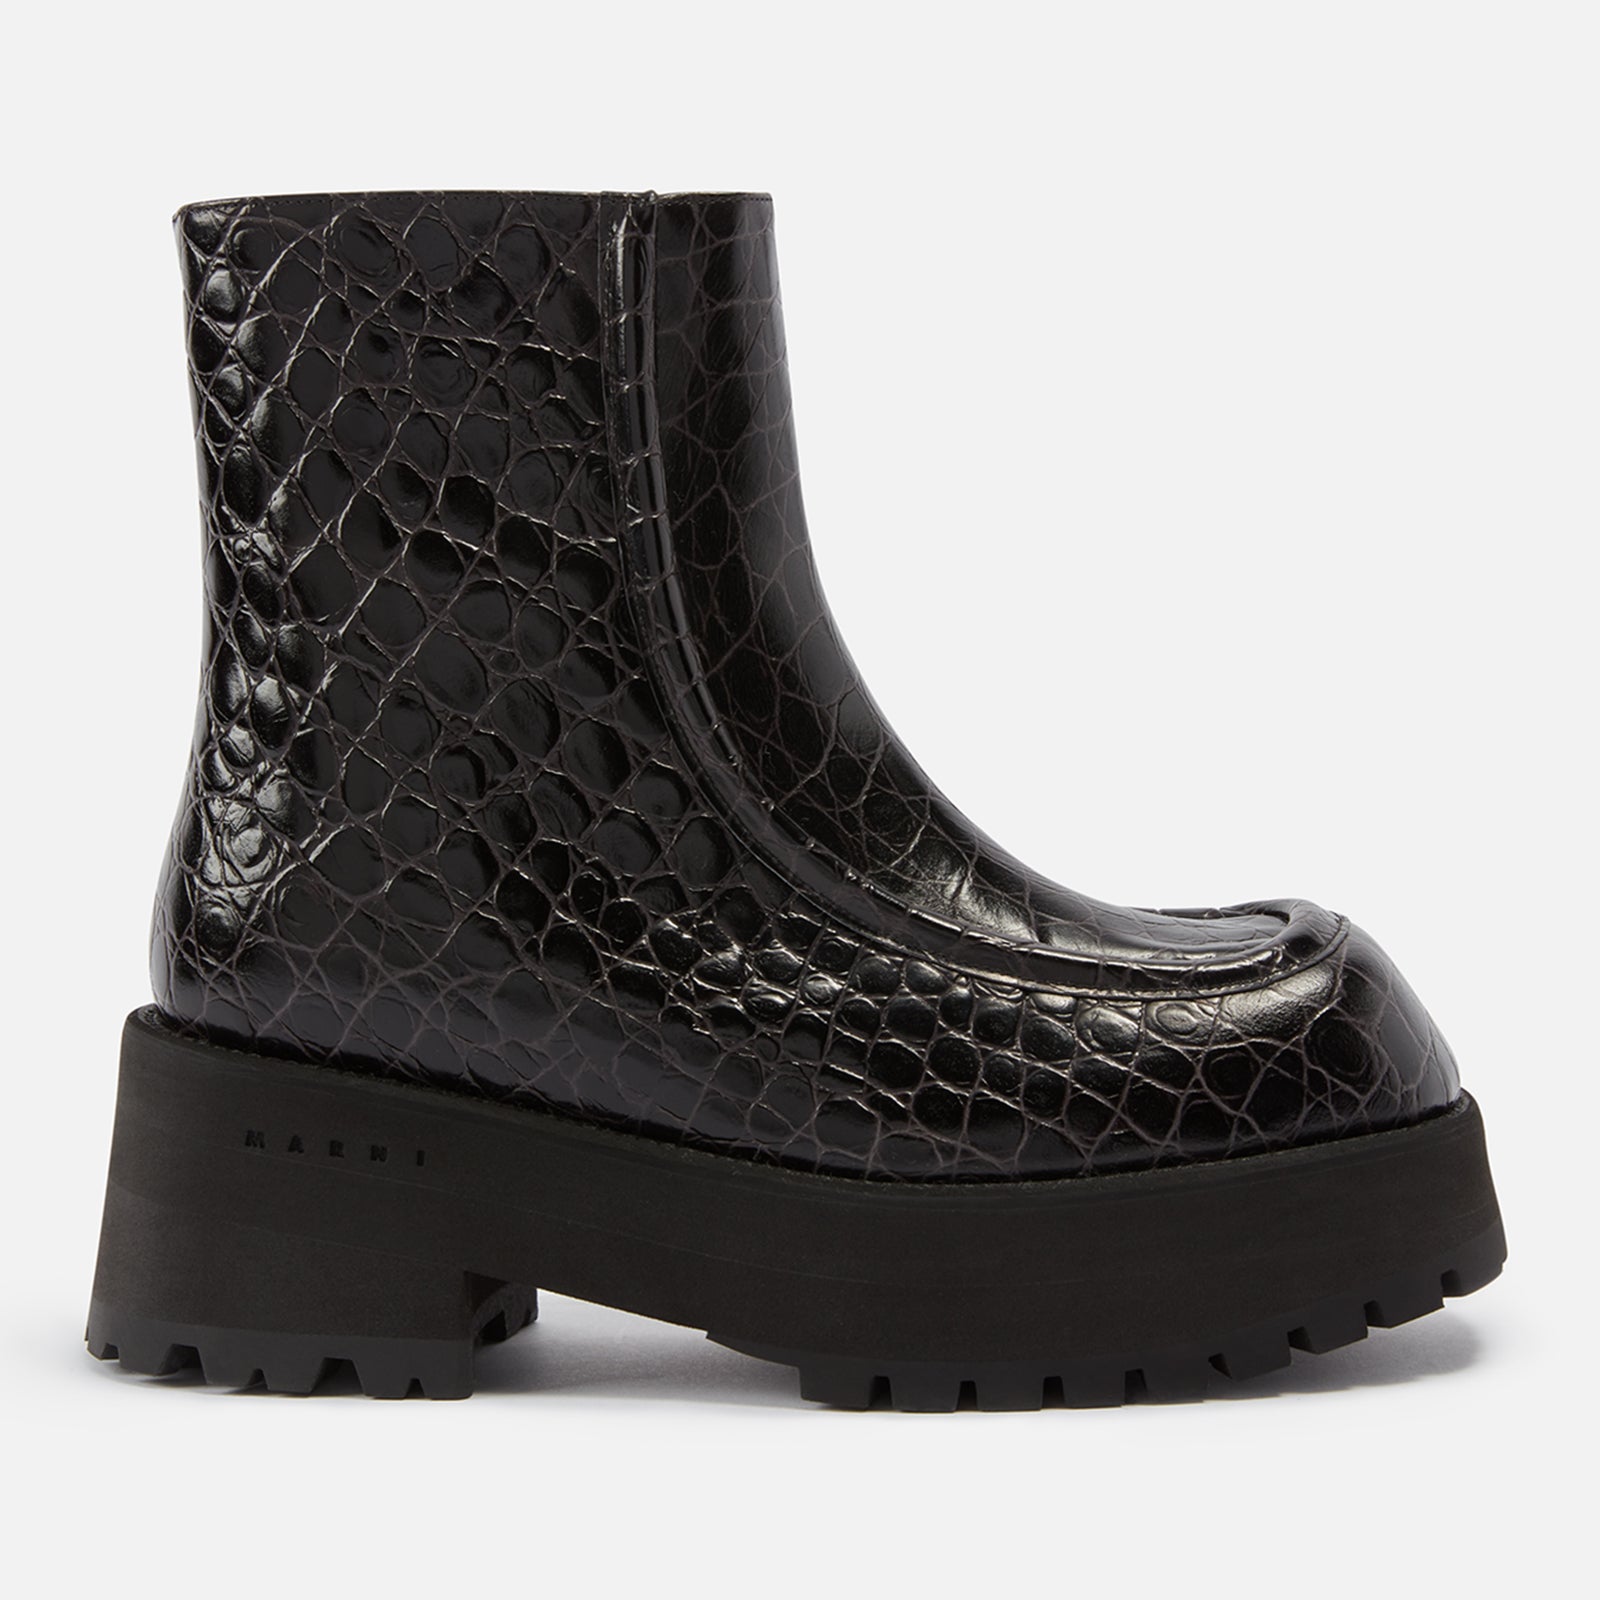 Marni Croc-Effect Leather Ankle Boots Image 1